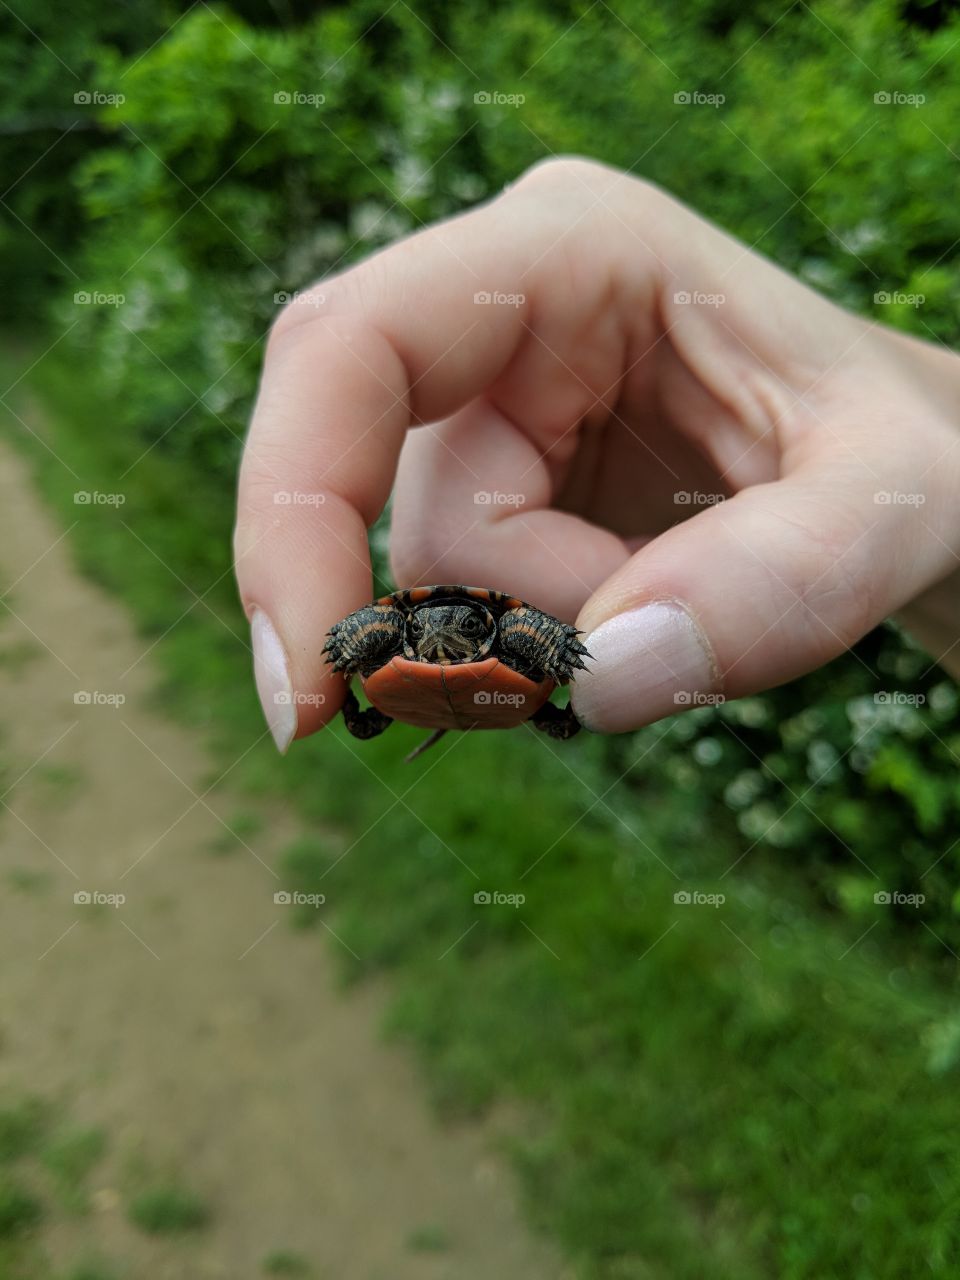 Helping one of nature's smallest of friends cross the road.